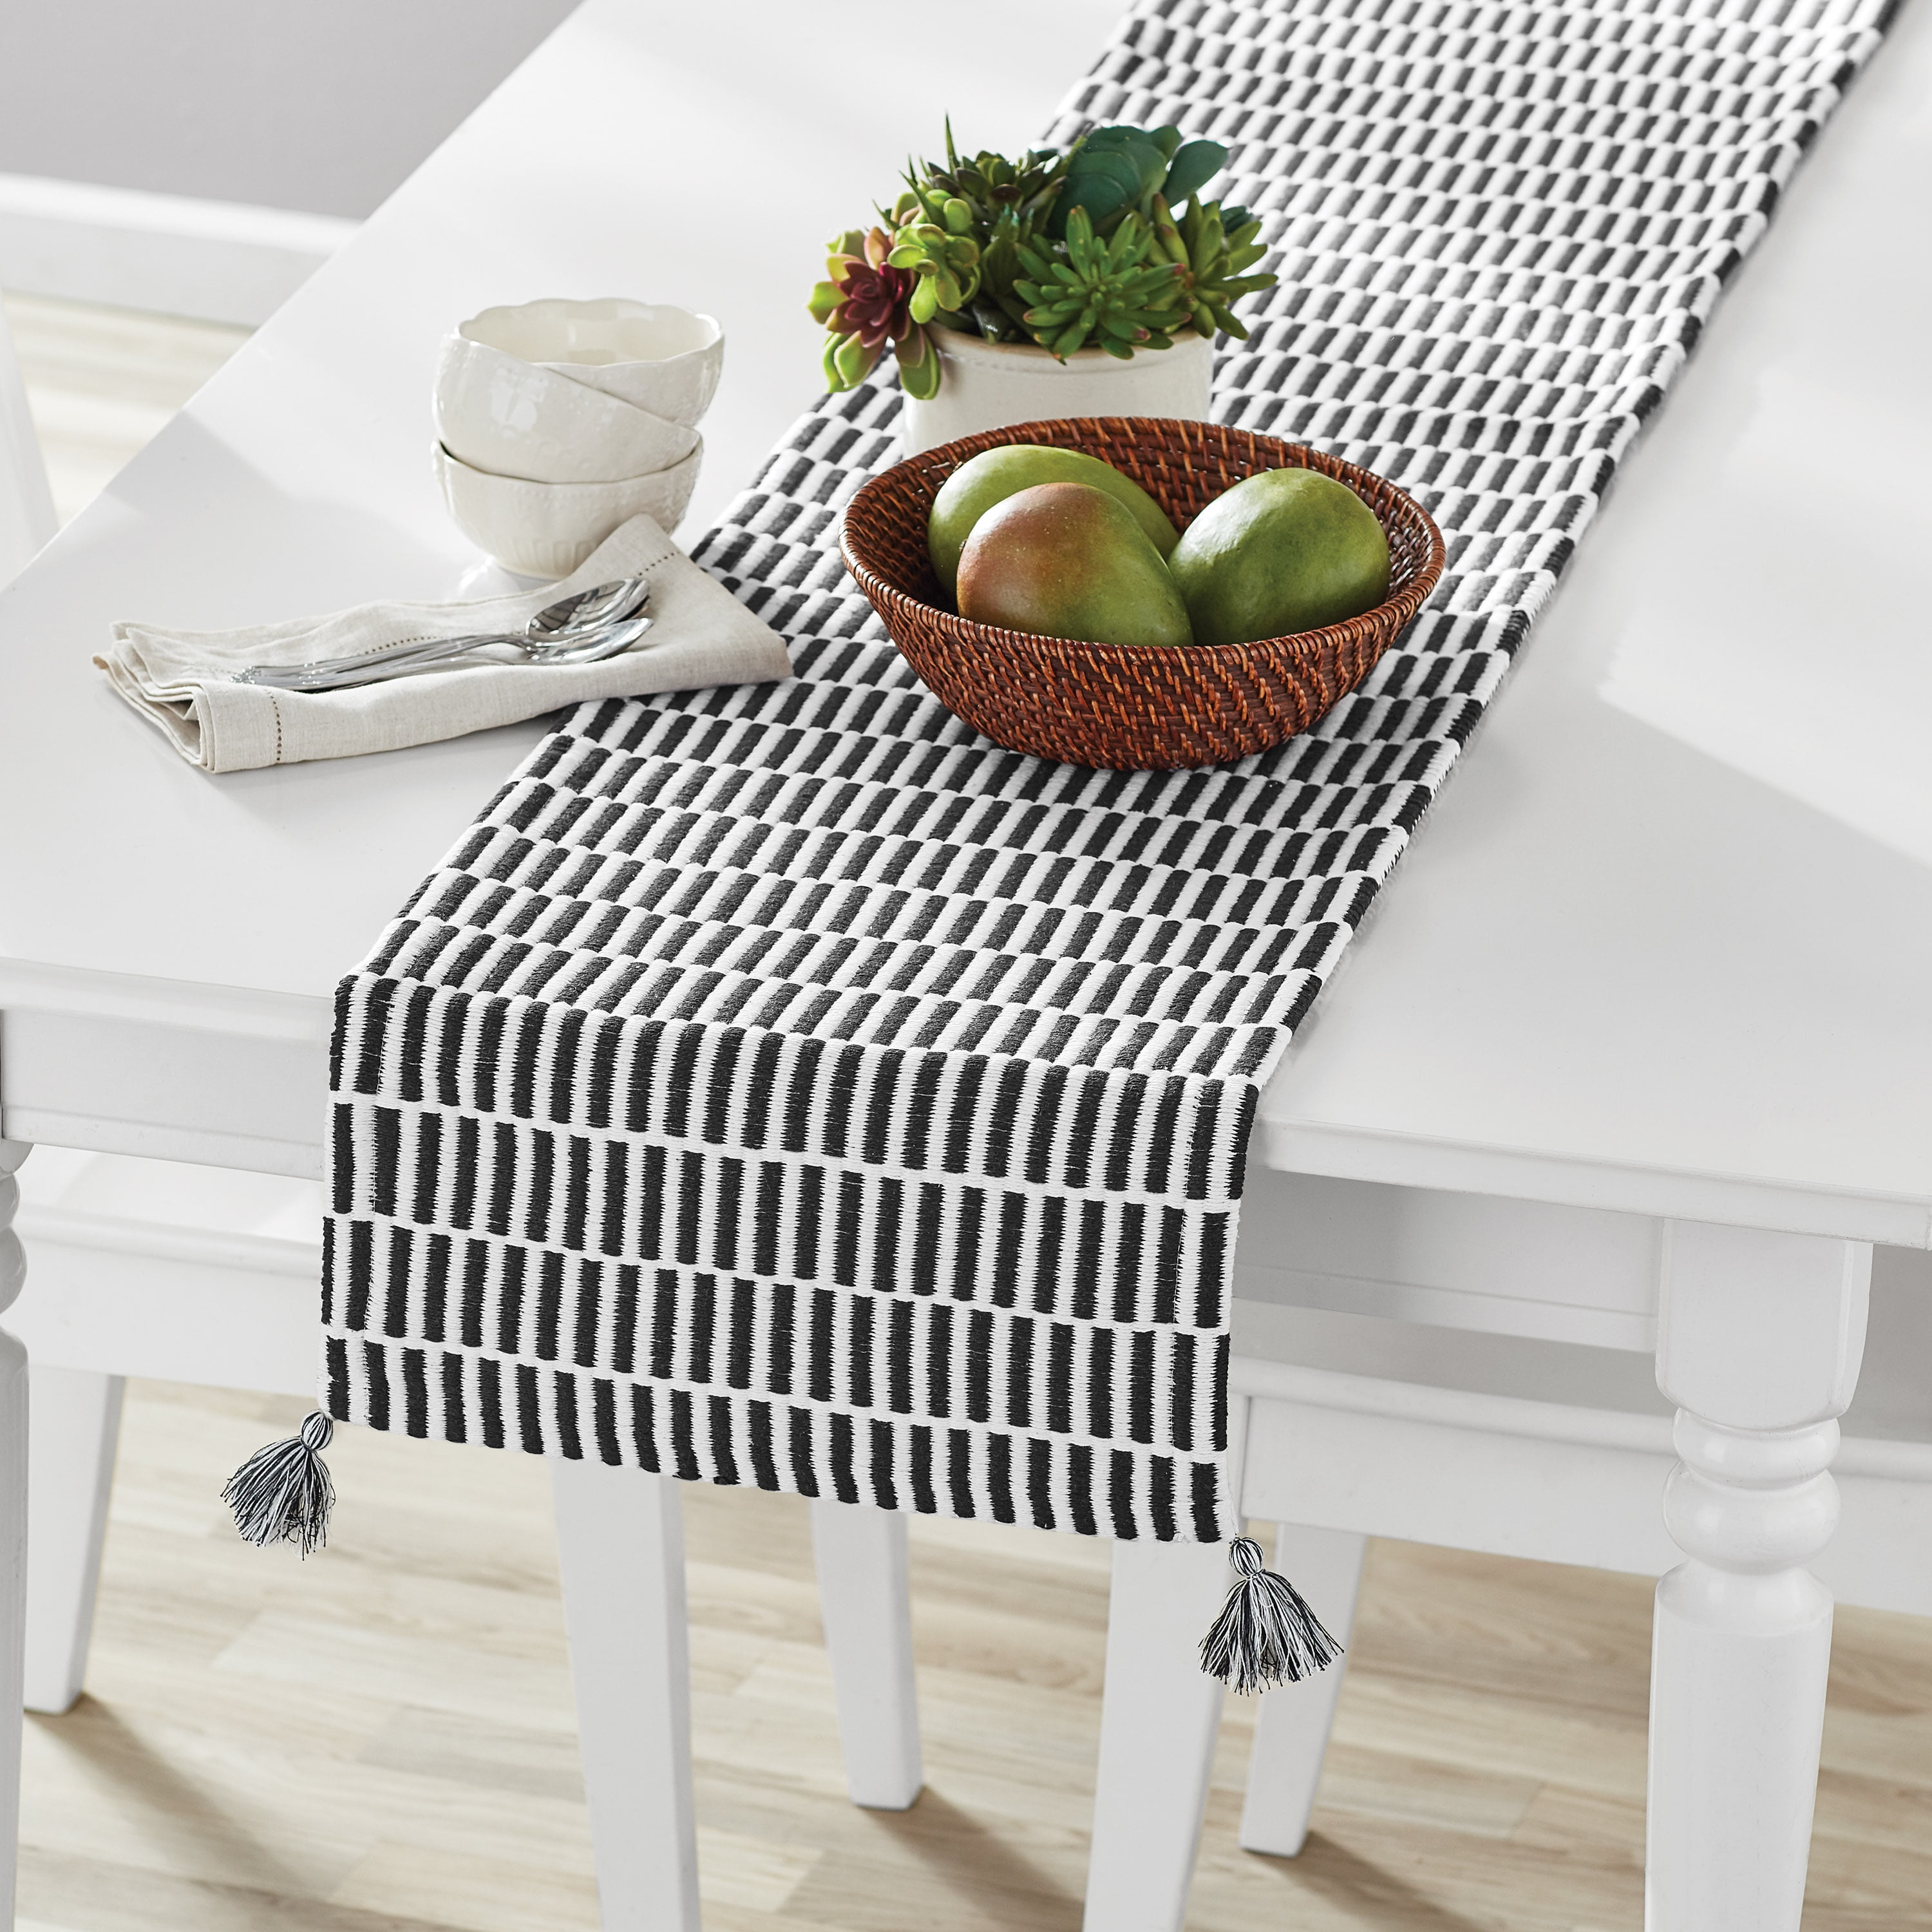 Mainstays Woven Black and White Table Runner - 14"x72"